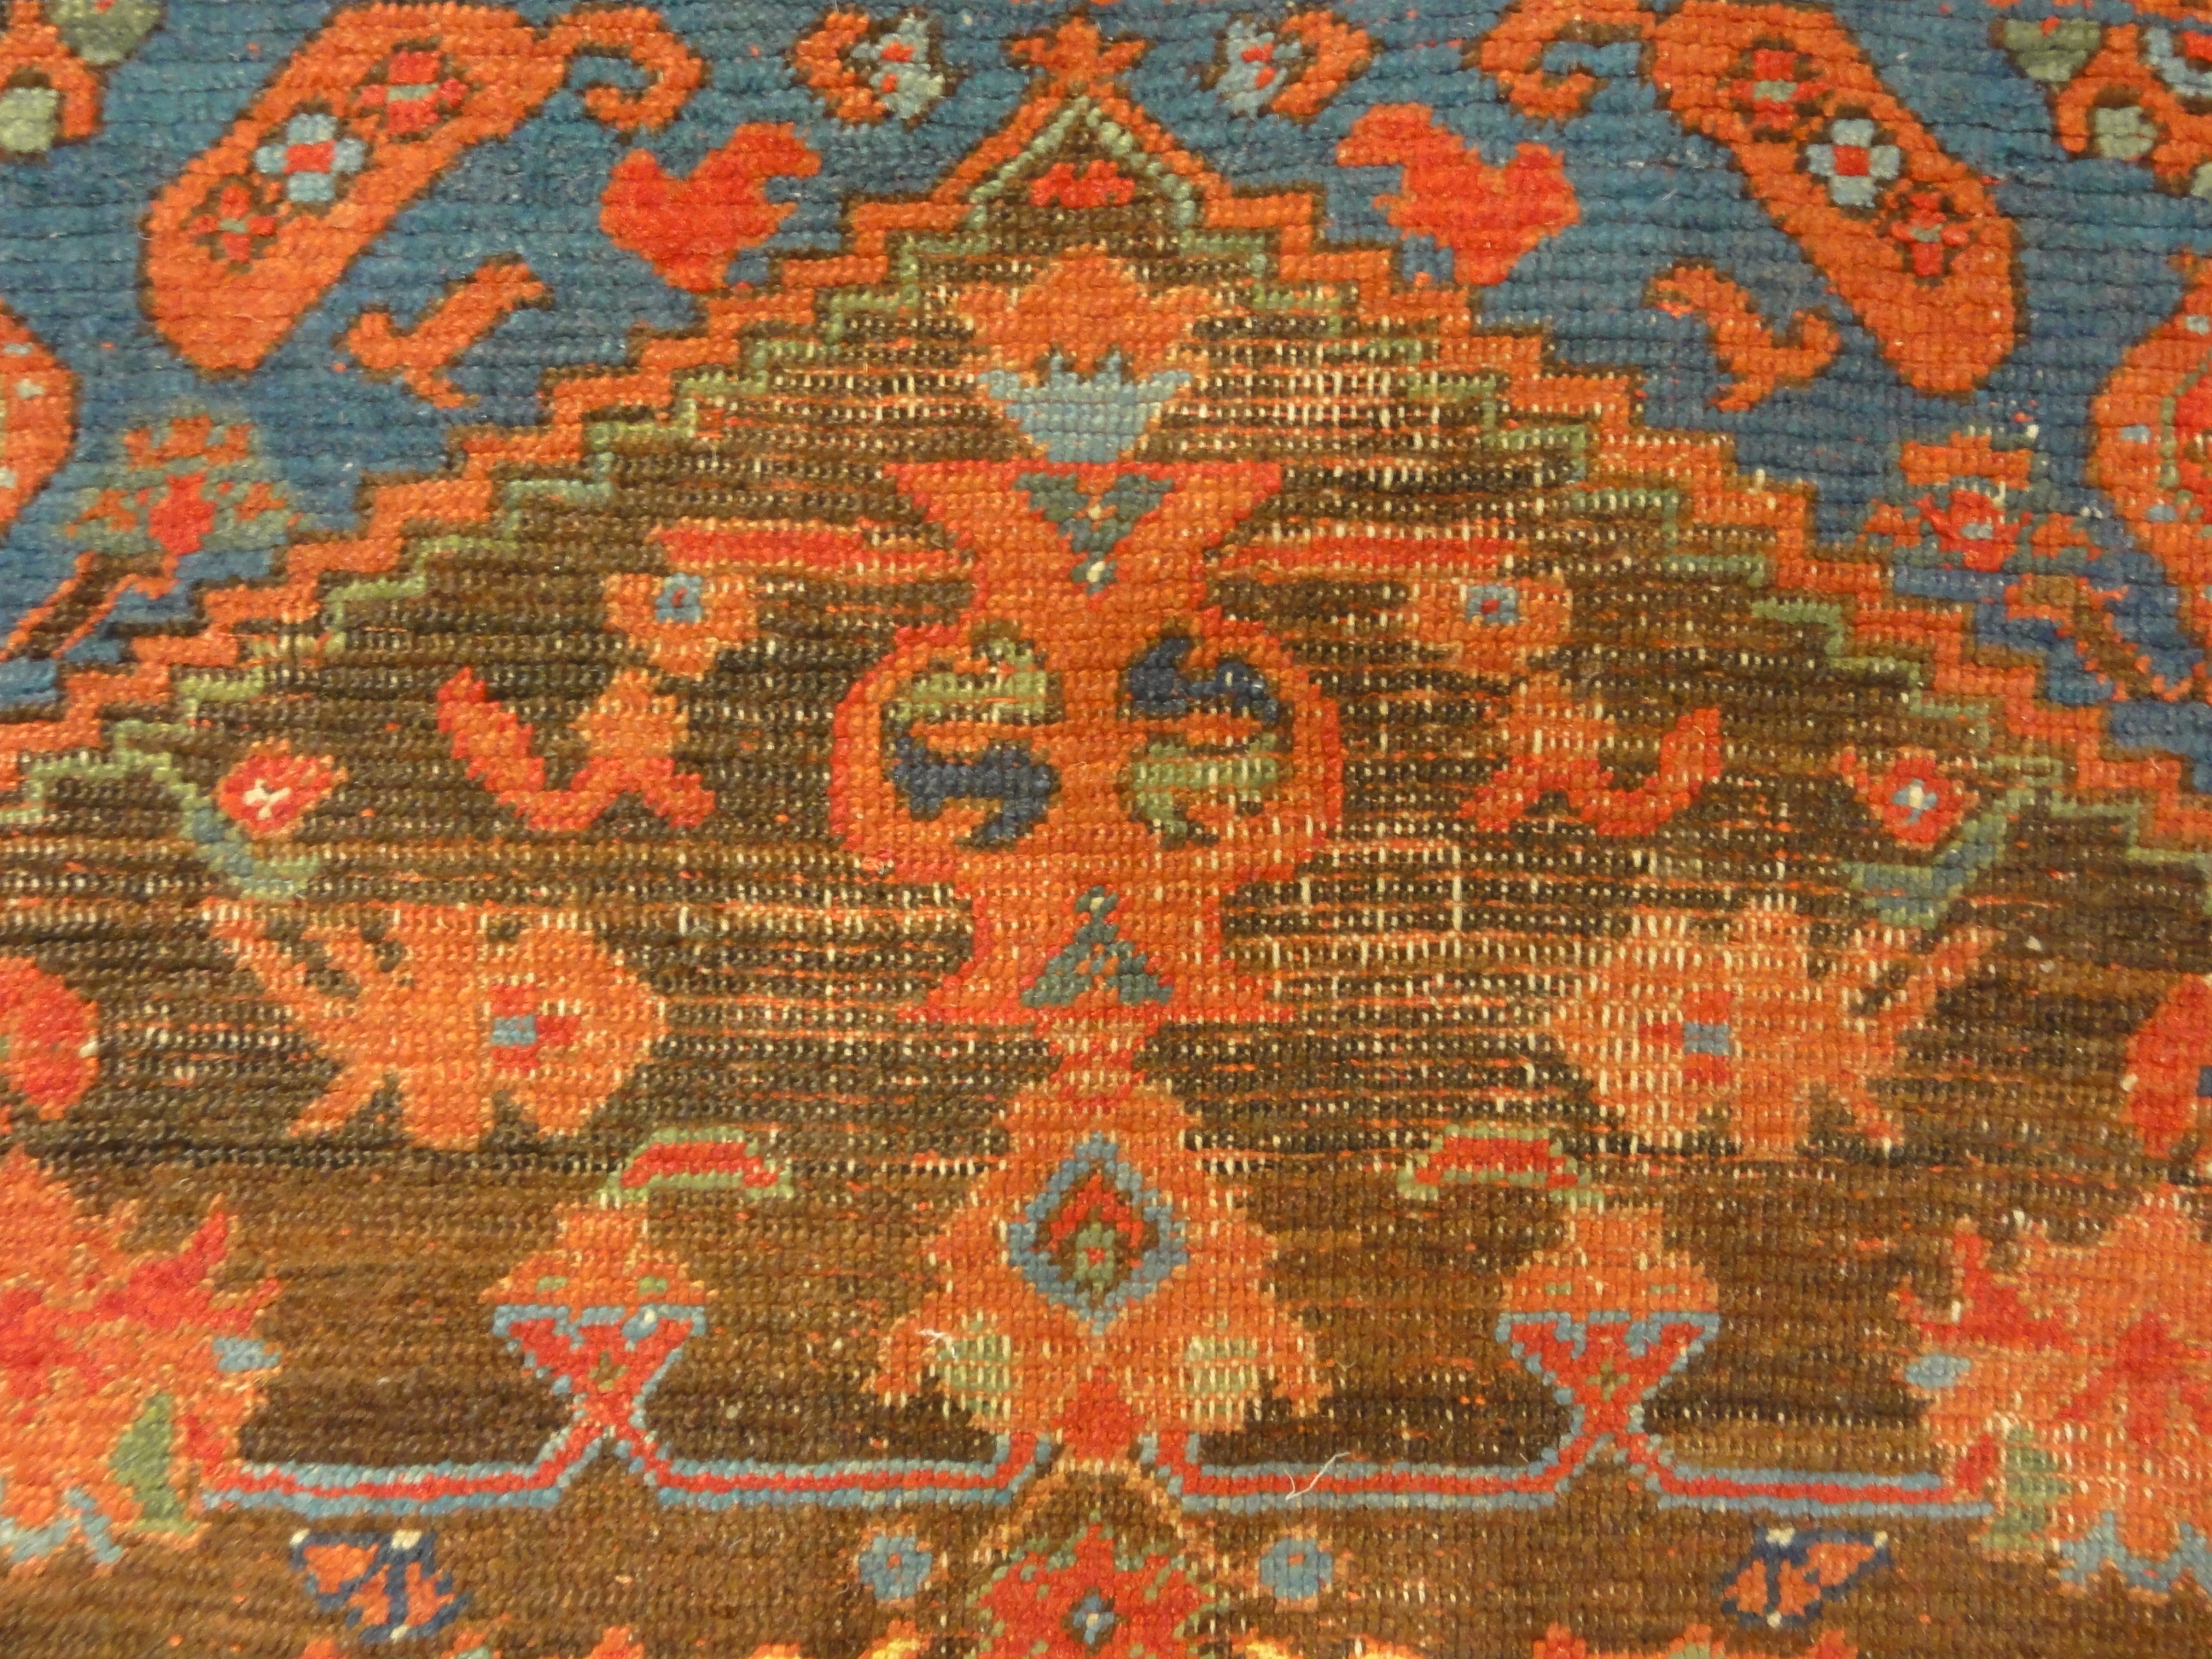 Antique Turkish Kula Rug Circa 1880. A piece of genuine woven carpet art sold by the Santa Barbara Design Center and Rugs and More.